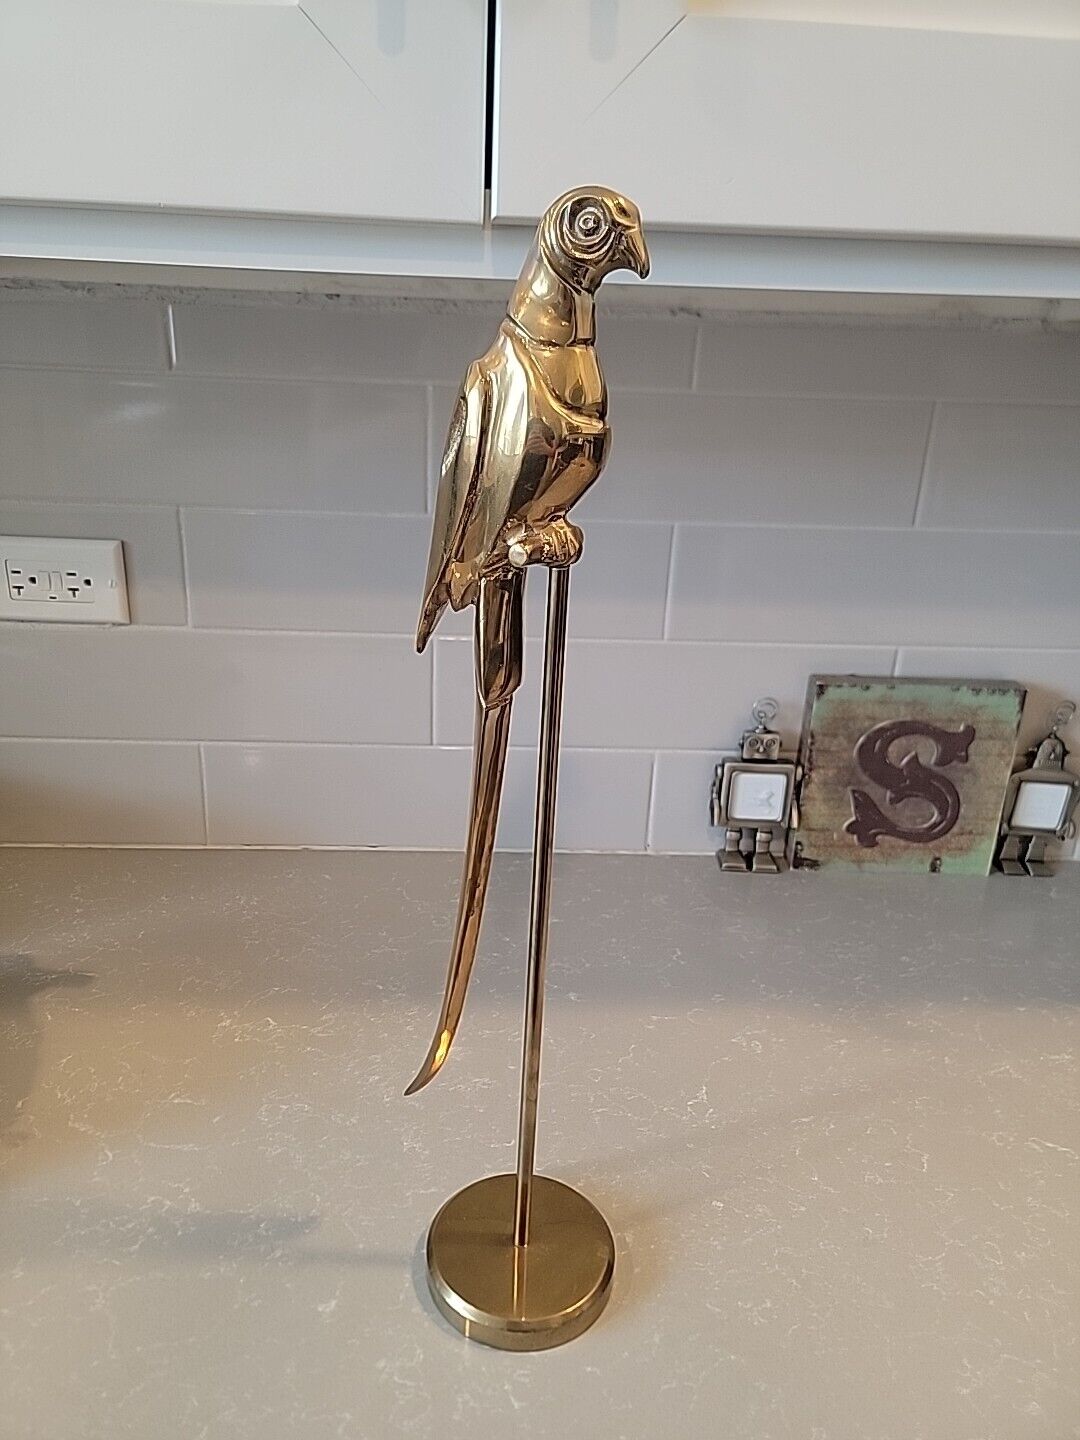 VTG MCM Gatco Solid Brass Parrot On A Perch Stand Sculpture Figurine 19